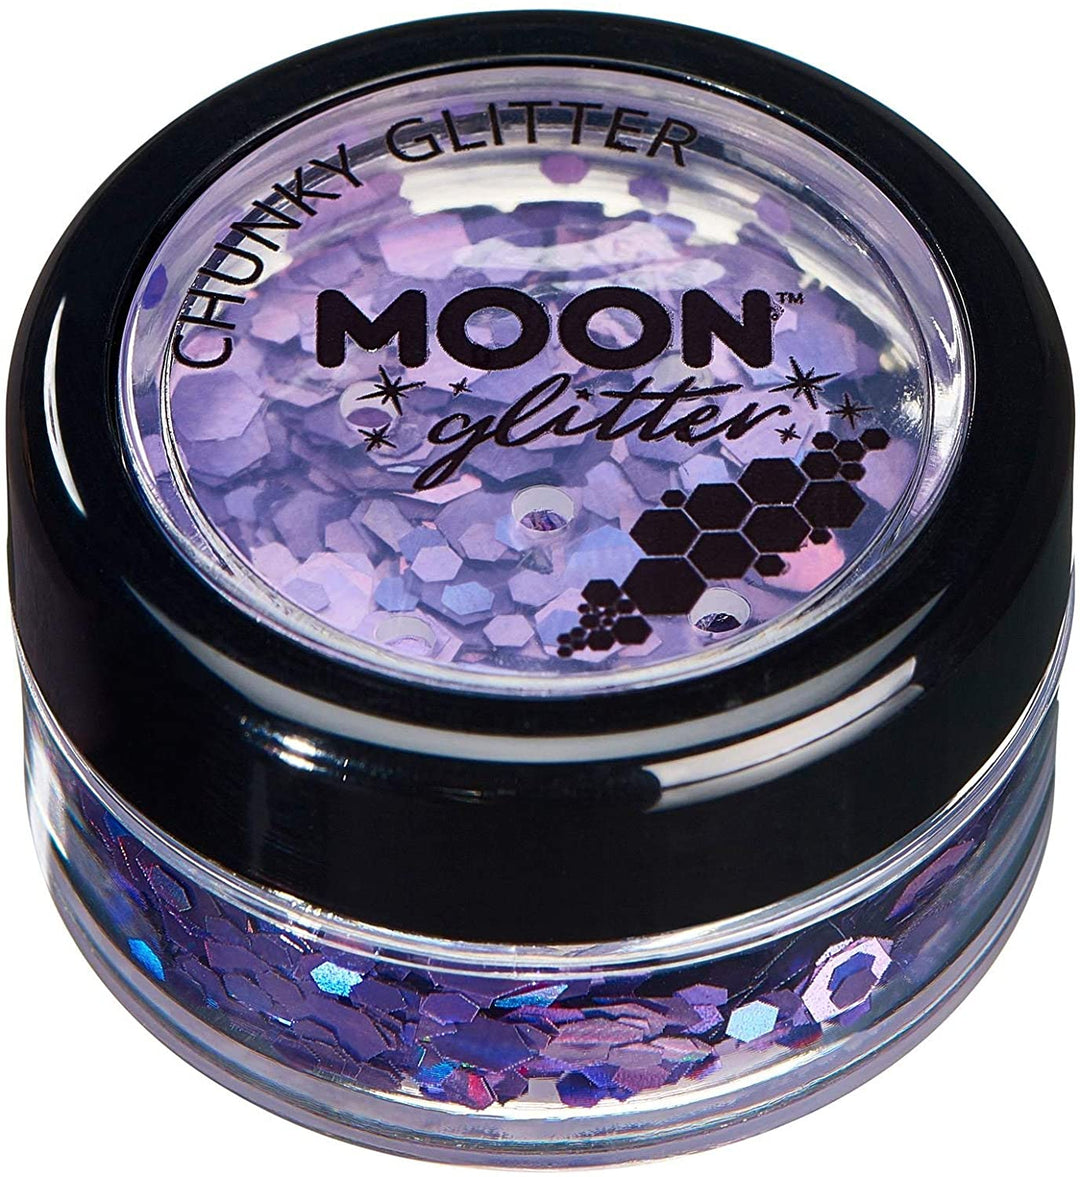 Chunky Holographic Glitter by Moon Glitter - Purple - Cosmetic Festival Makeup Glitter for Face, Body, Nails, Hair, Lips - 3g